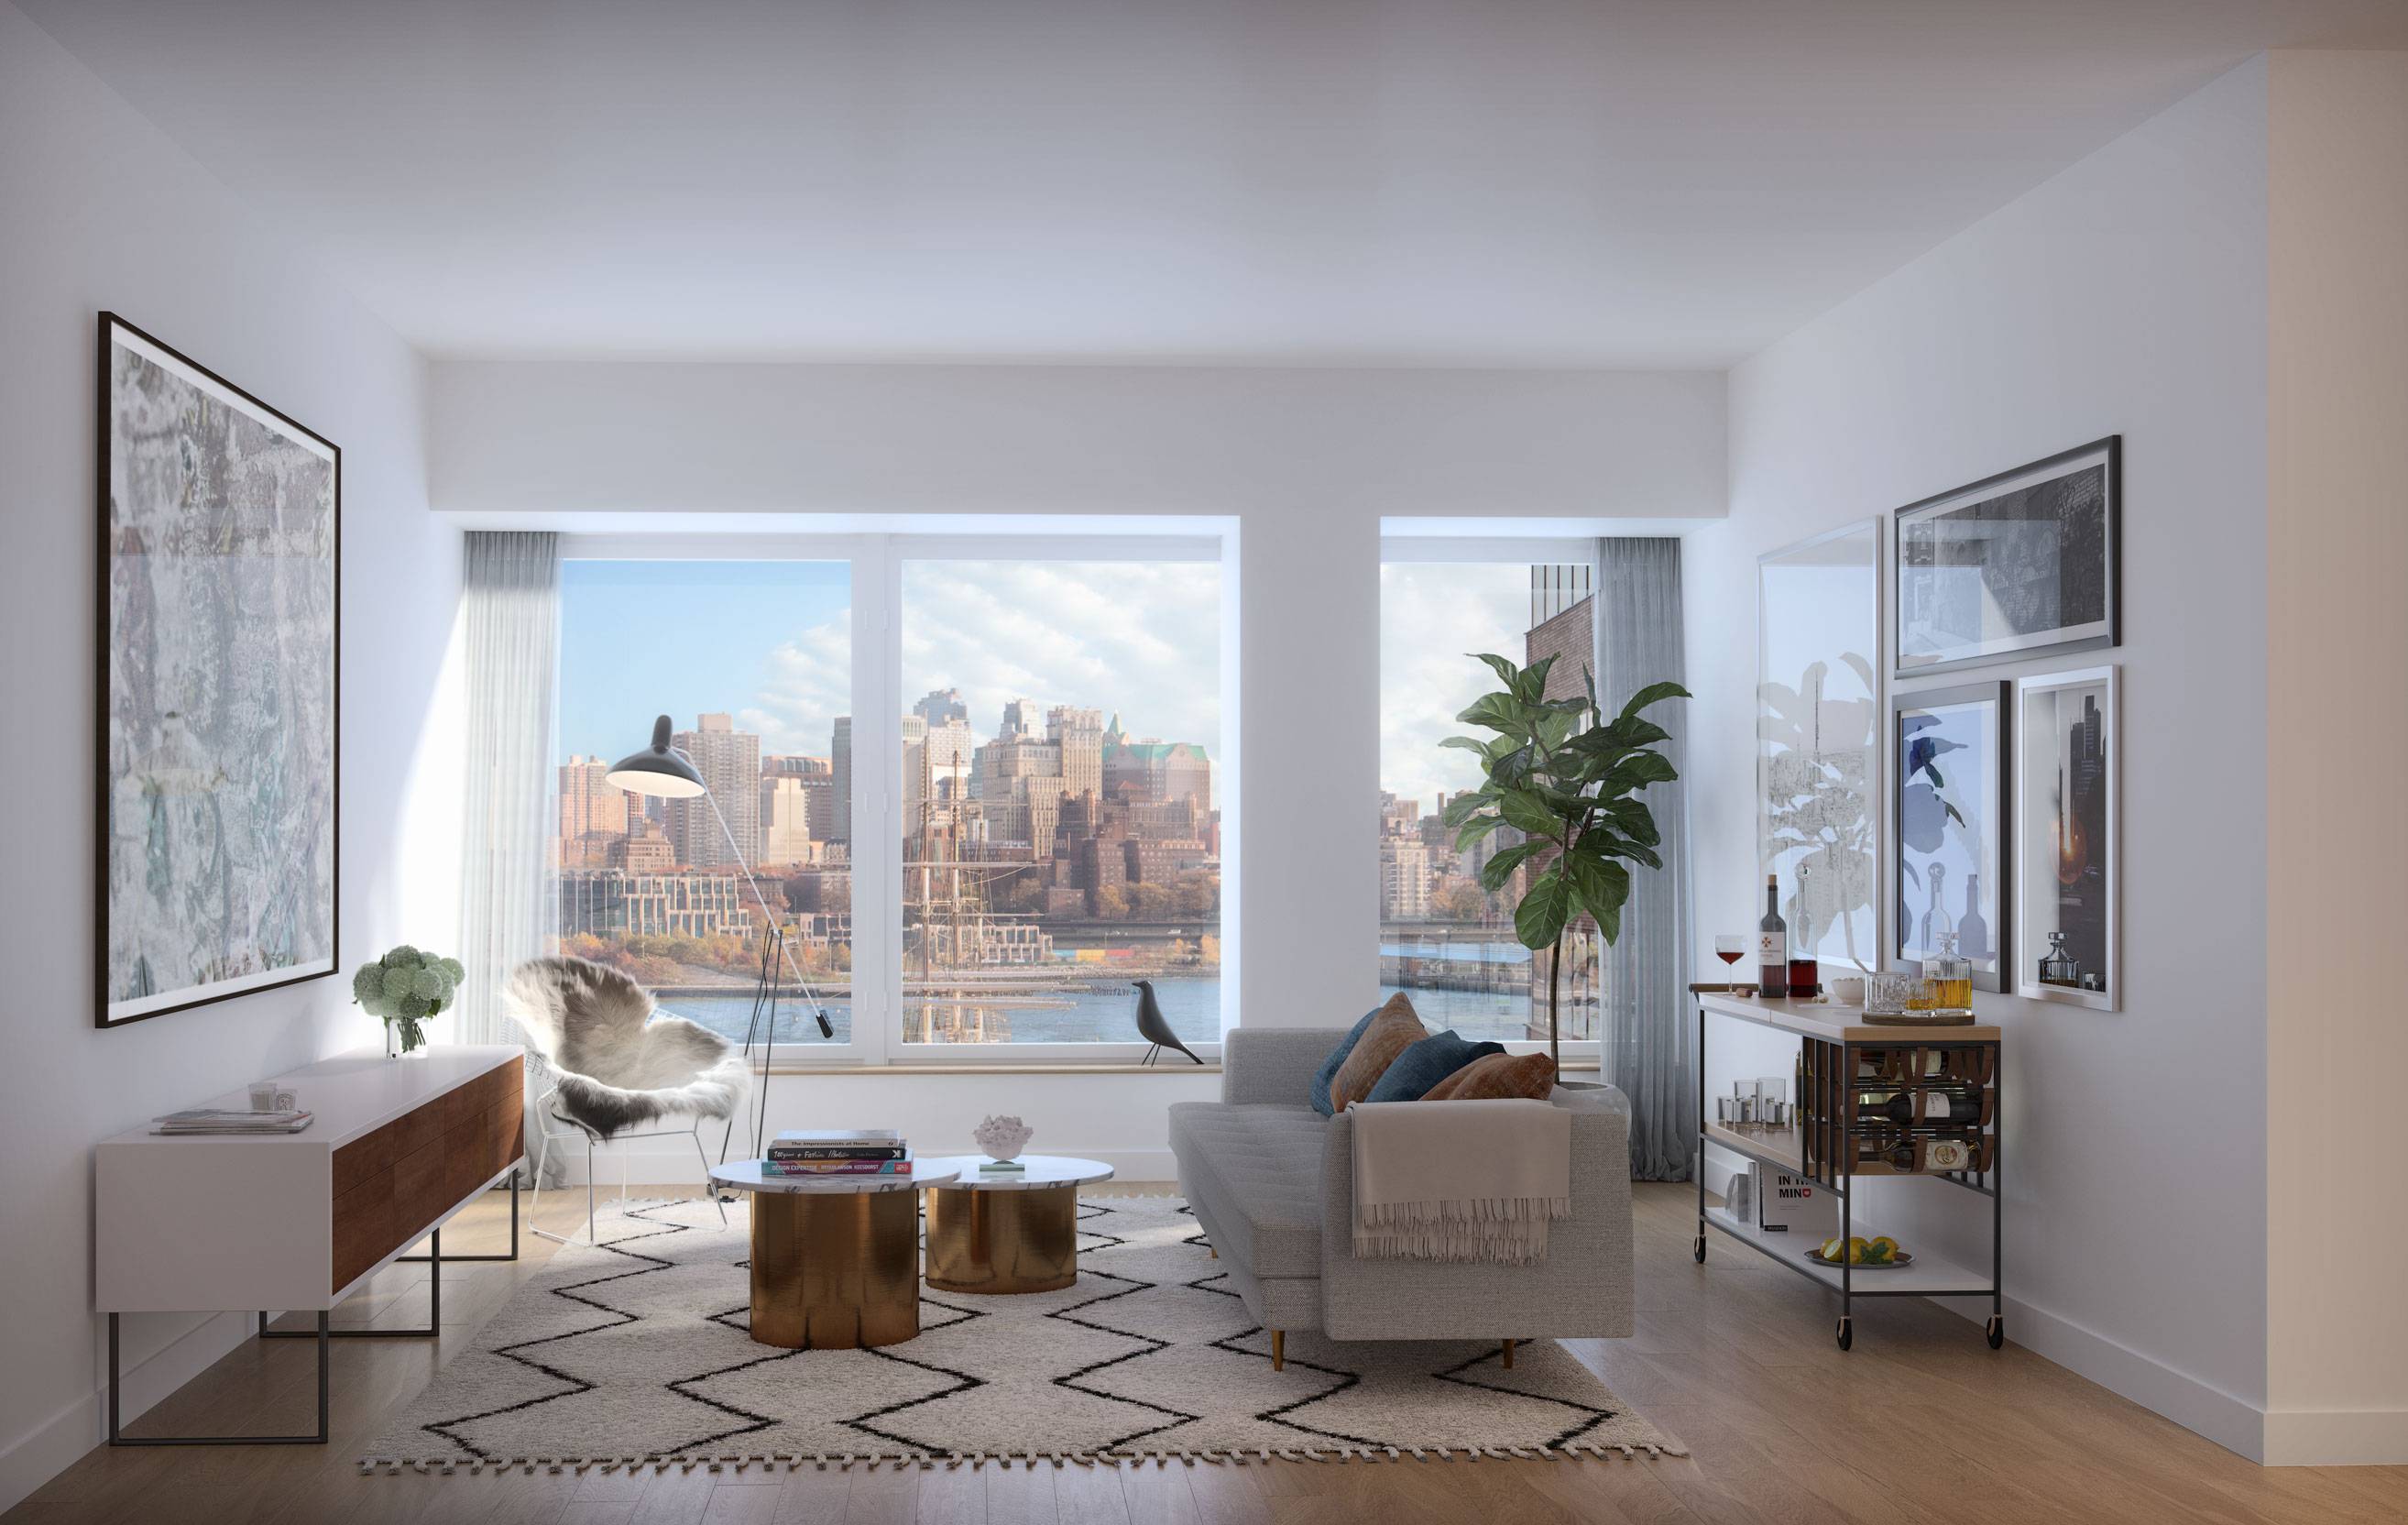 2-Bedroom Luxury Apartment  Rooftop Pool Building In Financial District